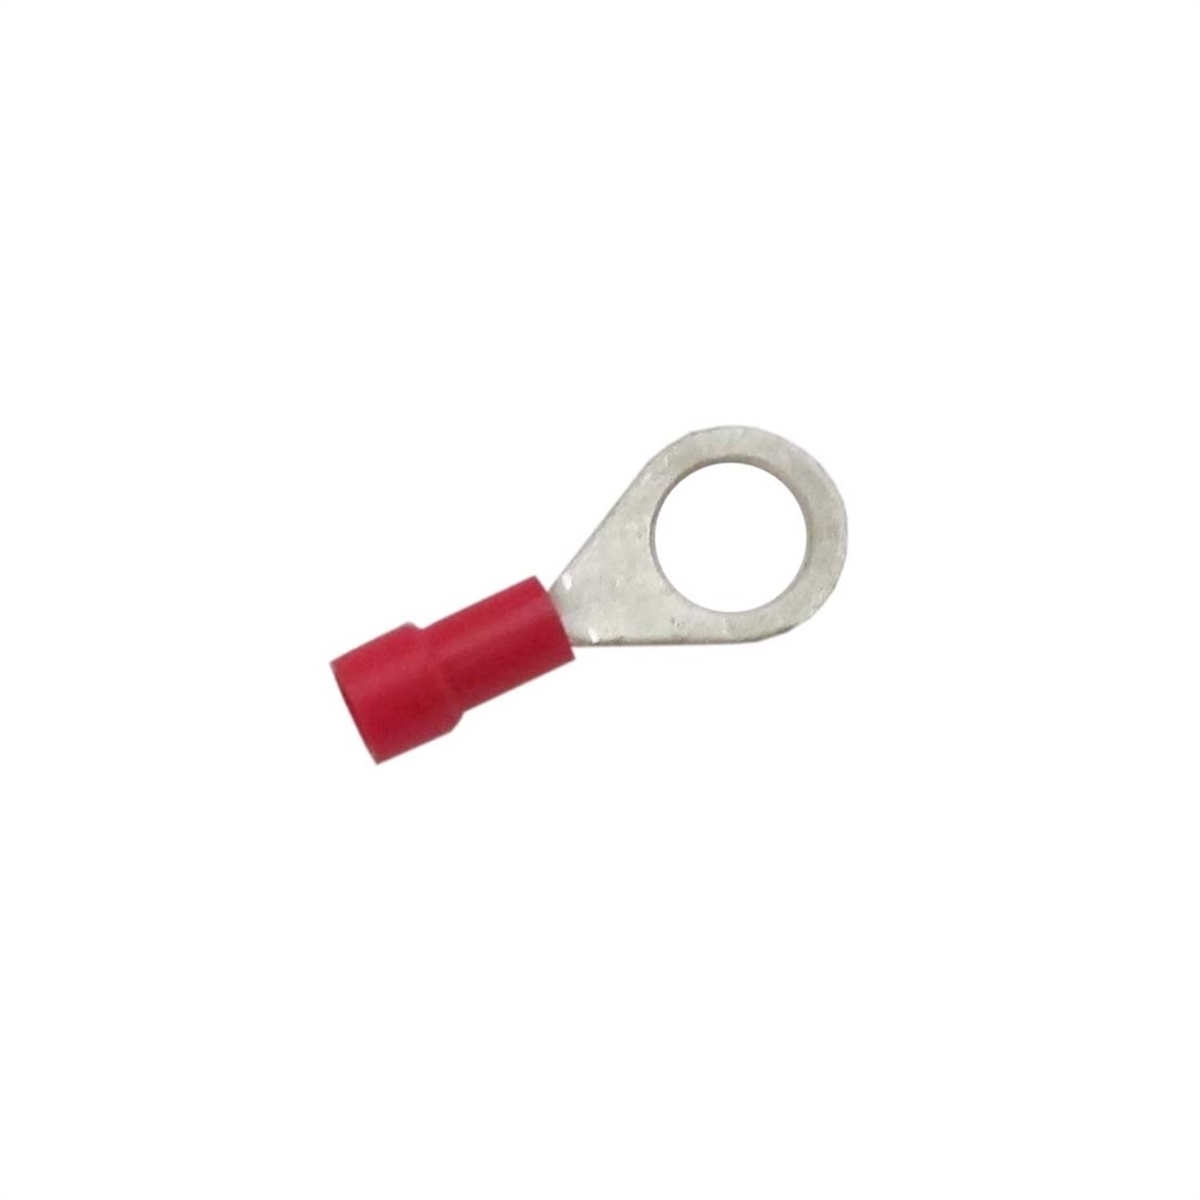 5/16" Red Ring Vinyl Insulated (22-18) (Bag 100)